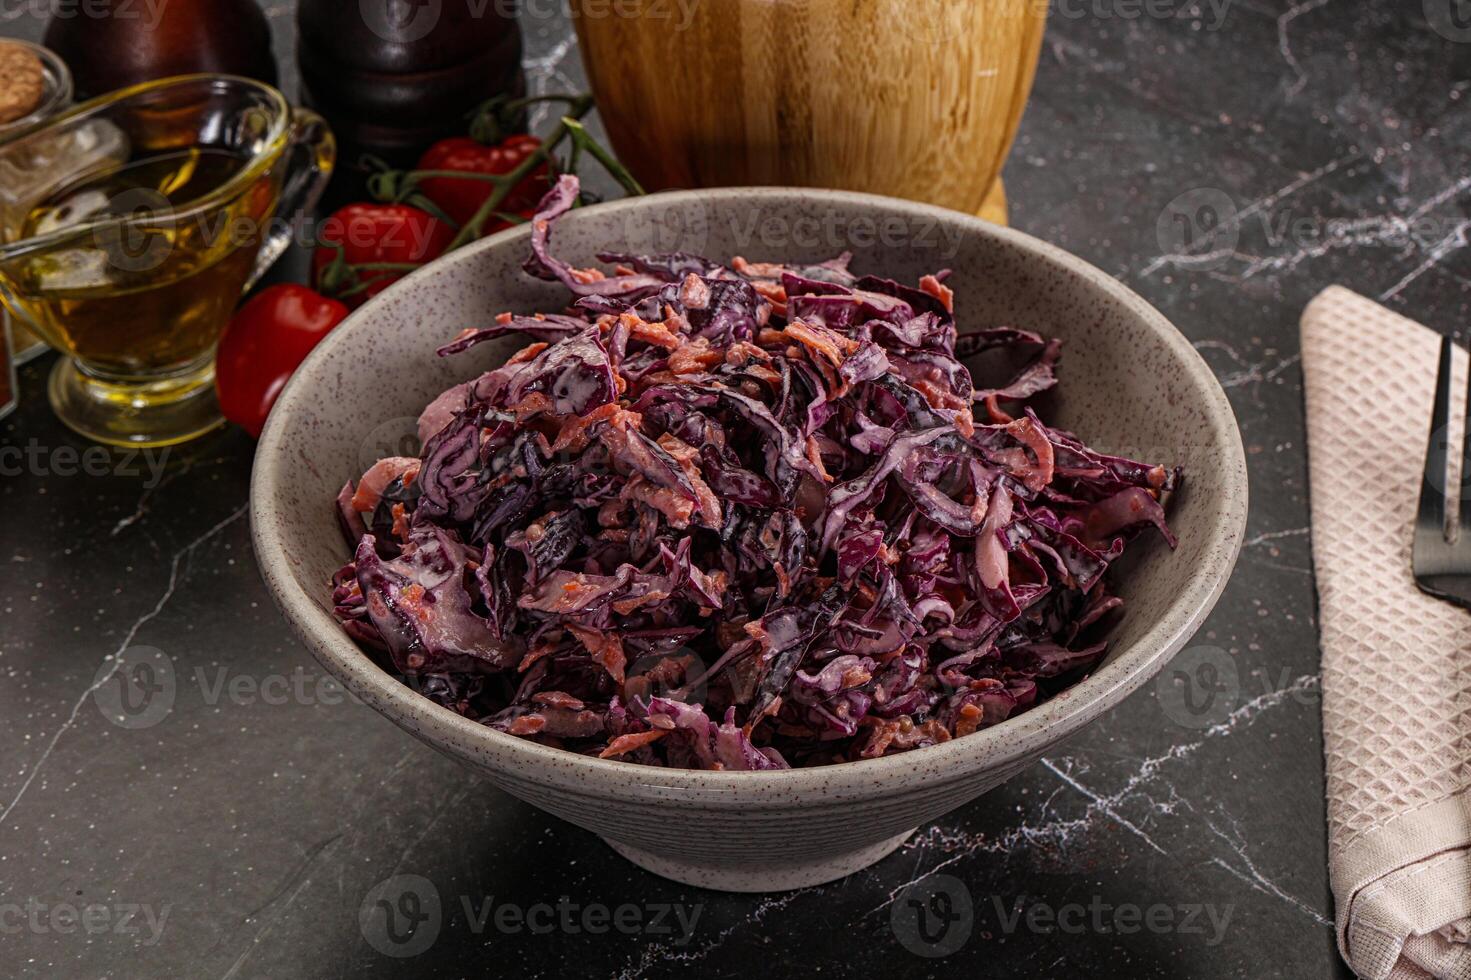 Coleslaw salad with cabbage and carrot photo